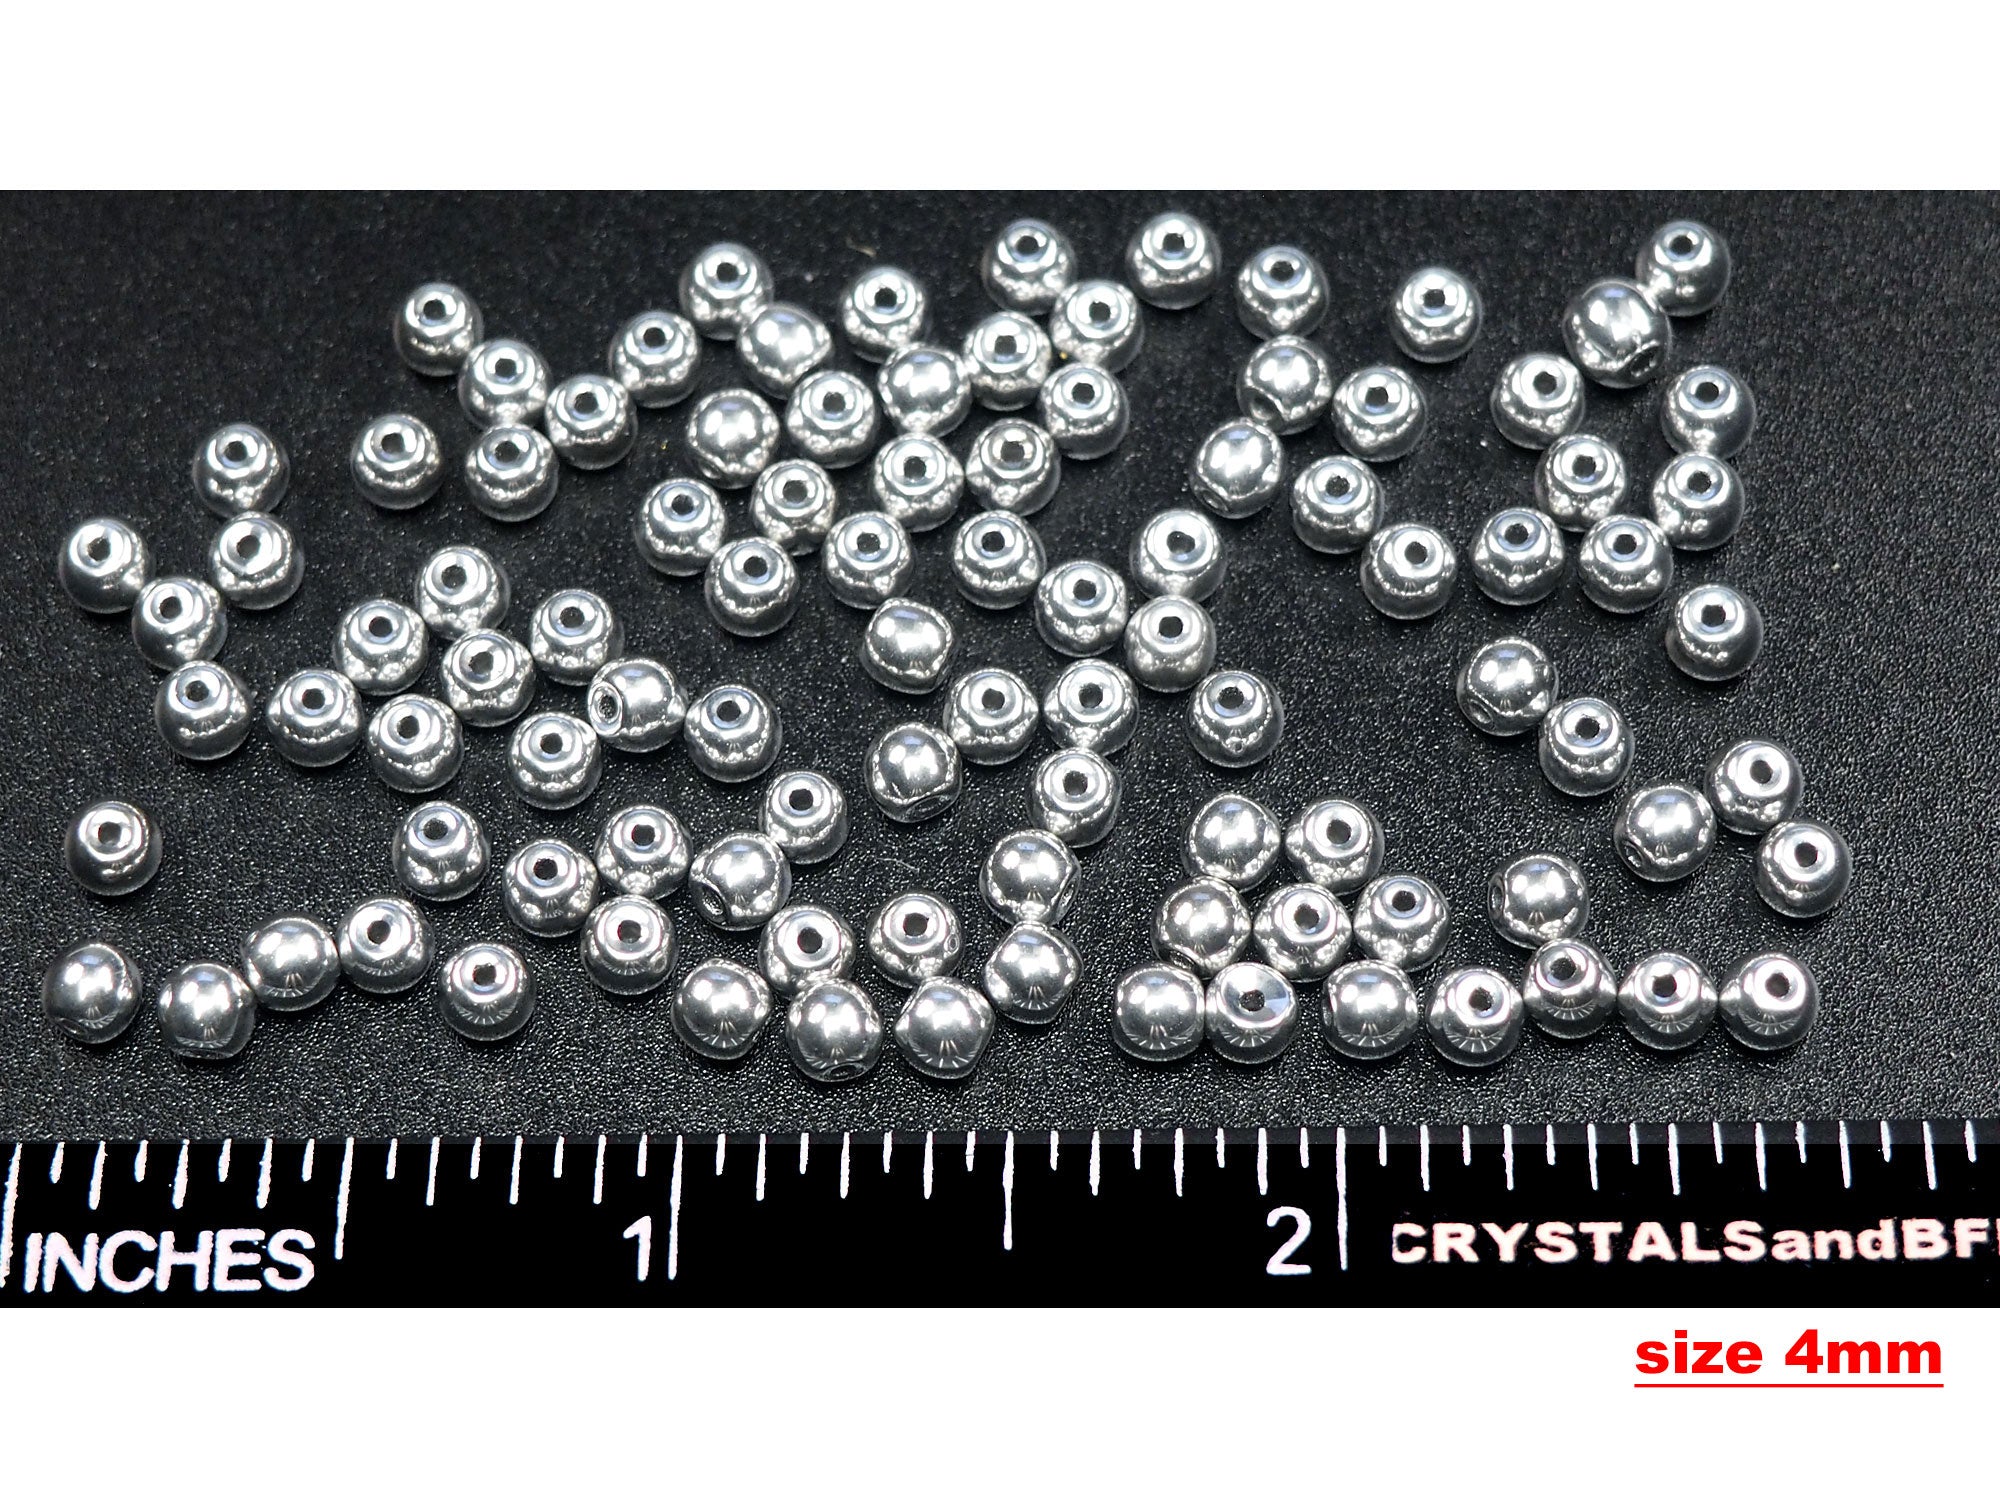 Czech Glass Druk Round Beads in sizes 4mm and 6mm, Smooth Pressed Beads, Crystal Full Silver Labrador CAL